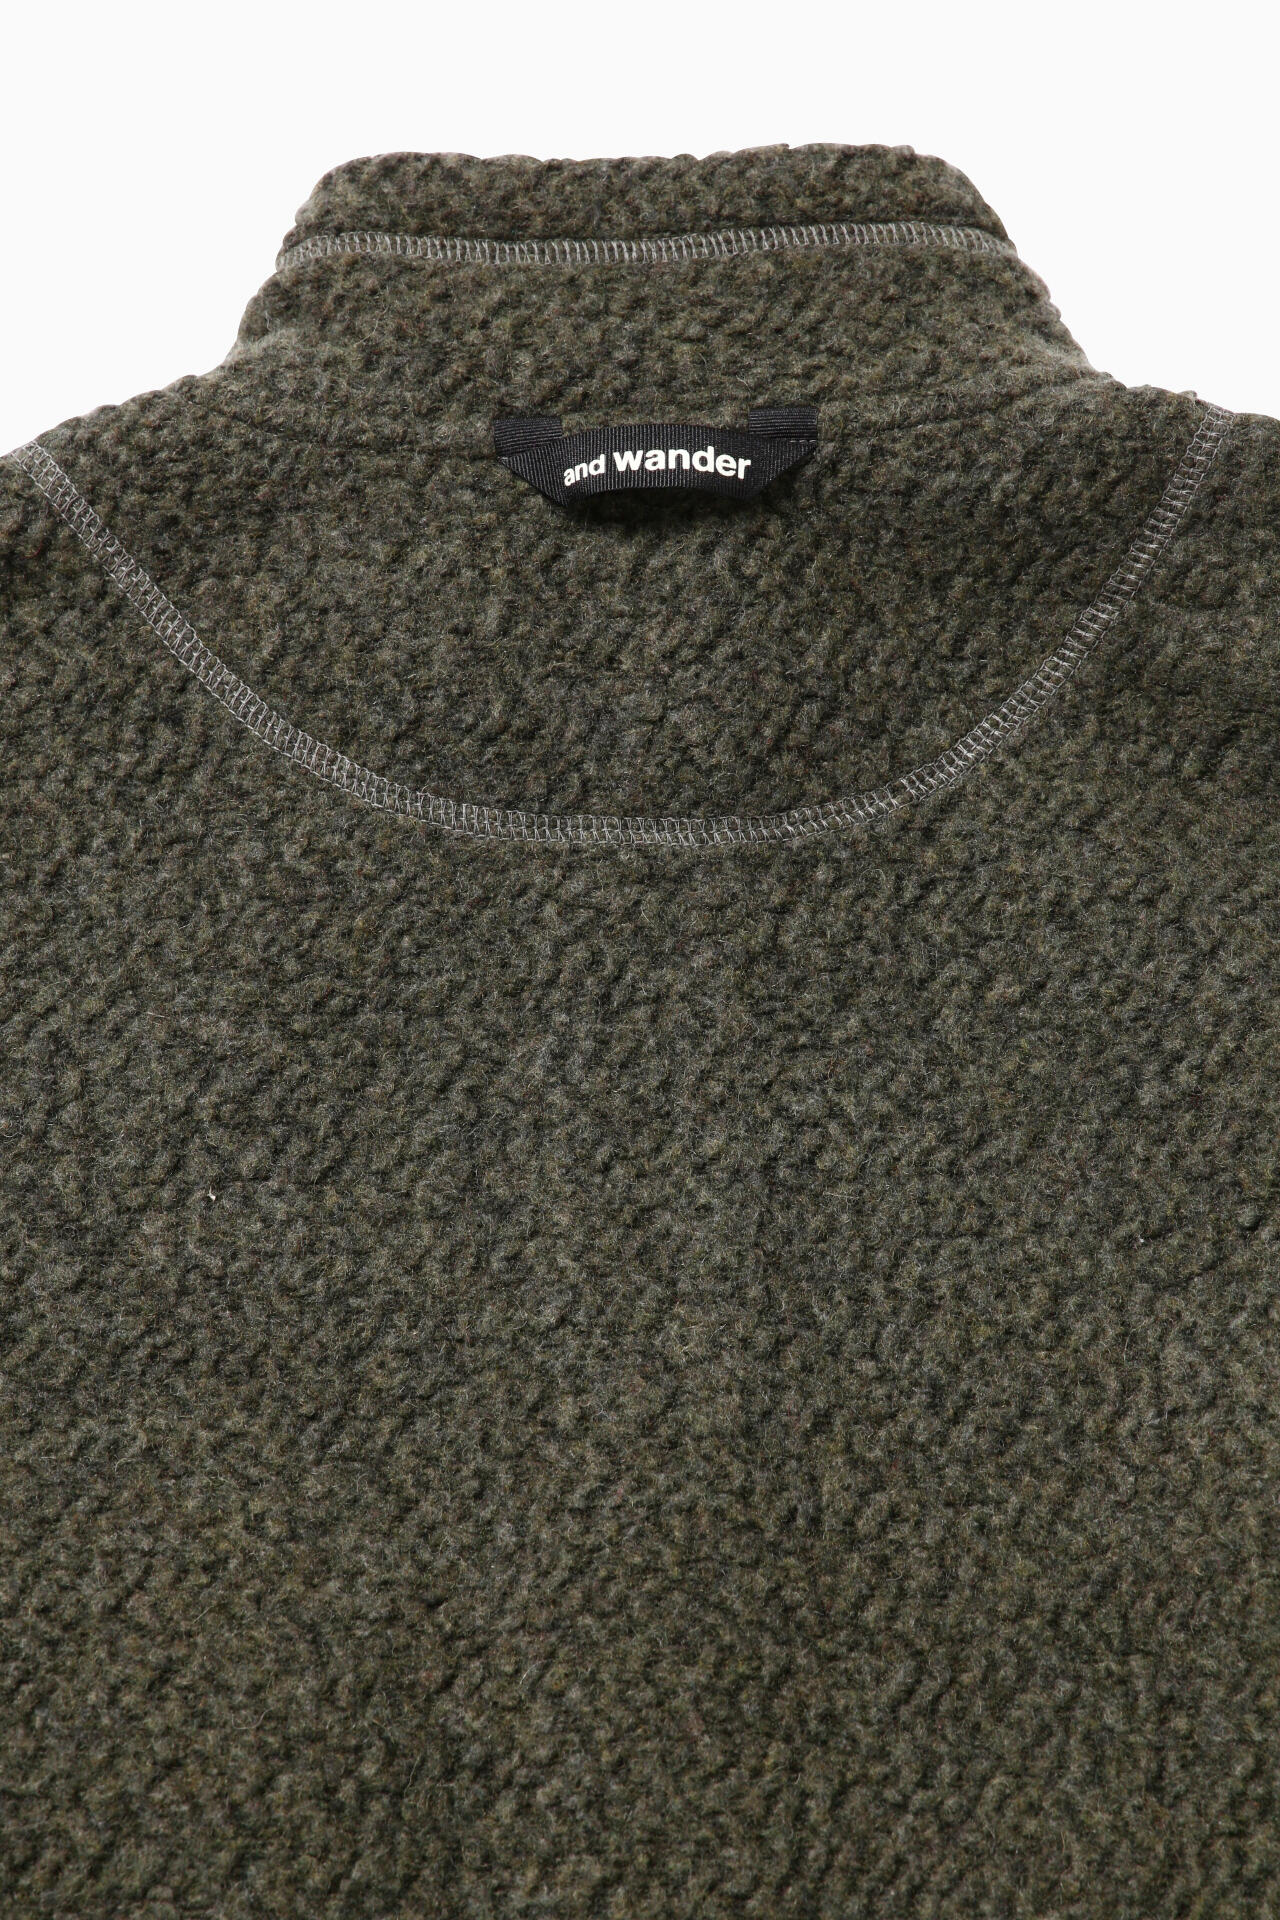 re wool JQ stand zip | cut_knit | and wander ONLINE STORE